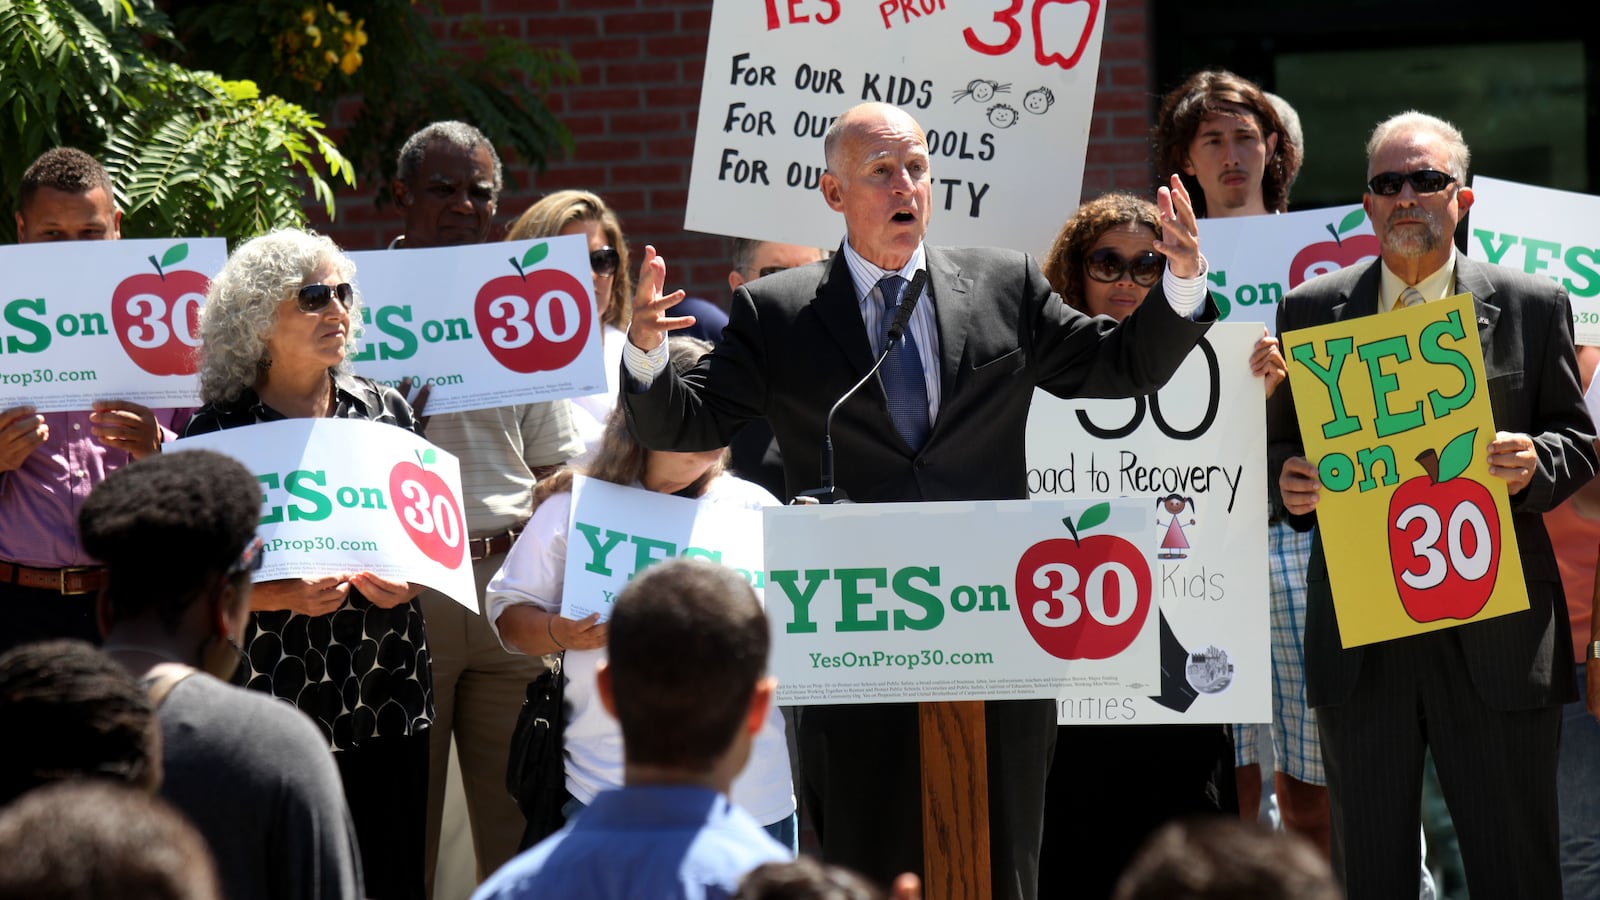 California Governor Jerry Brown advocates for increased education funding in 2012. (Photo by Sandy Huffaker/Corbis via Getty Images)